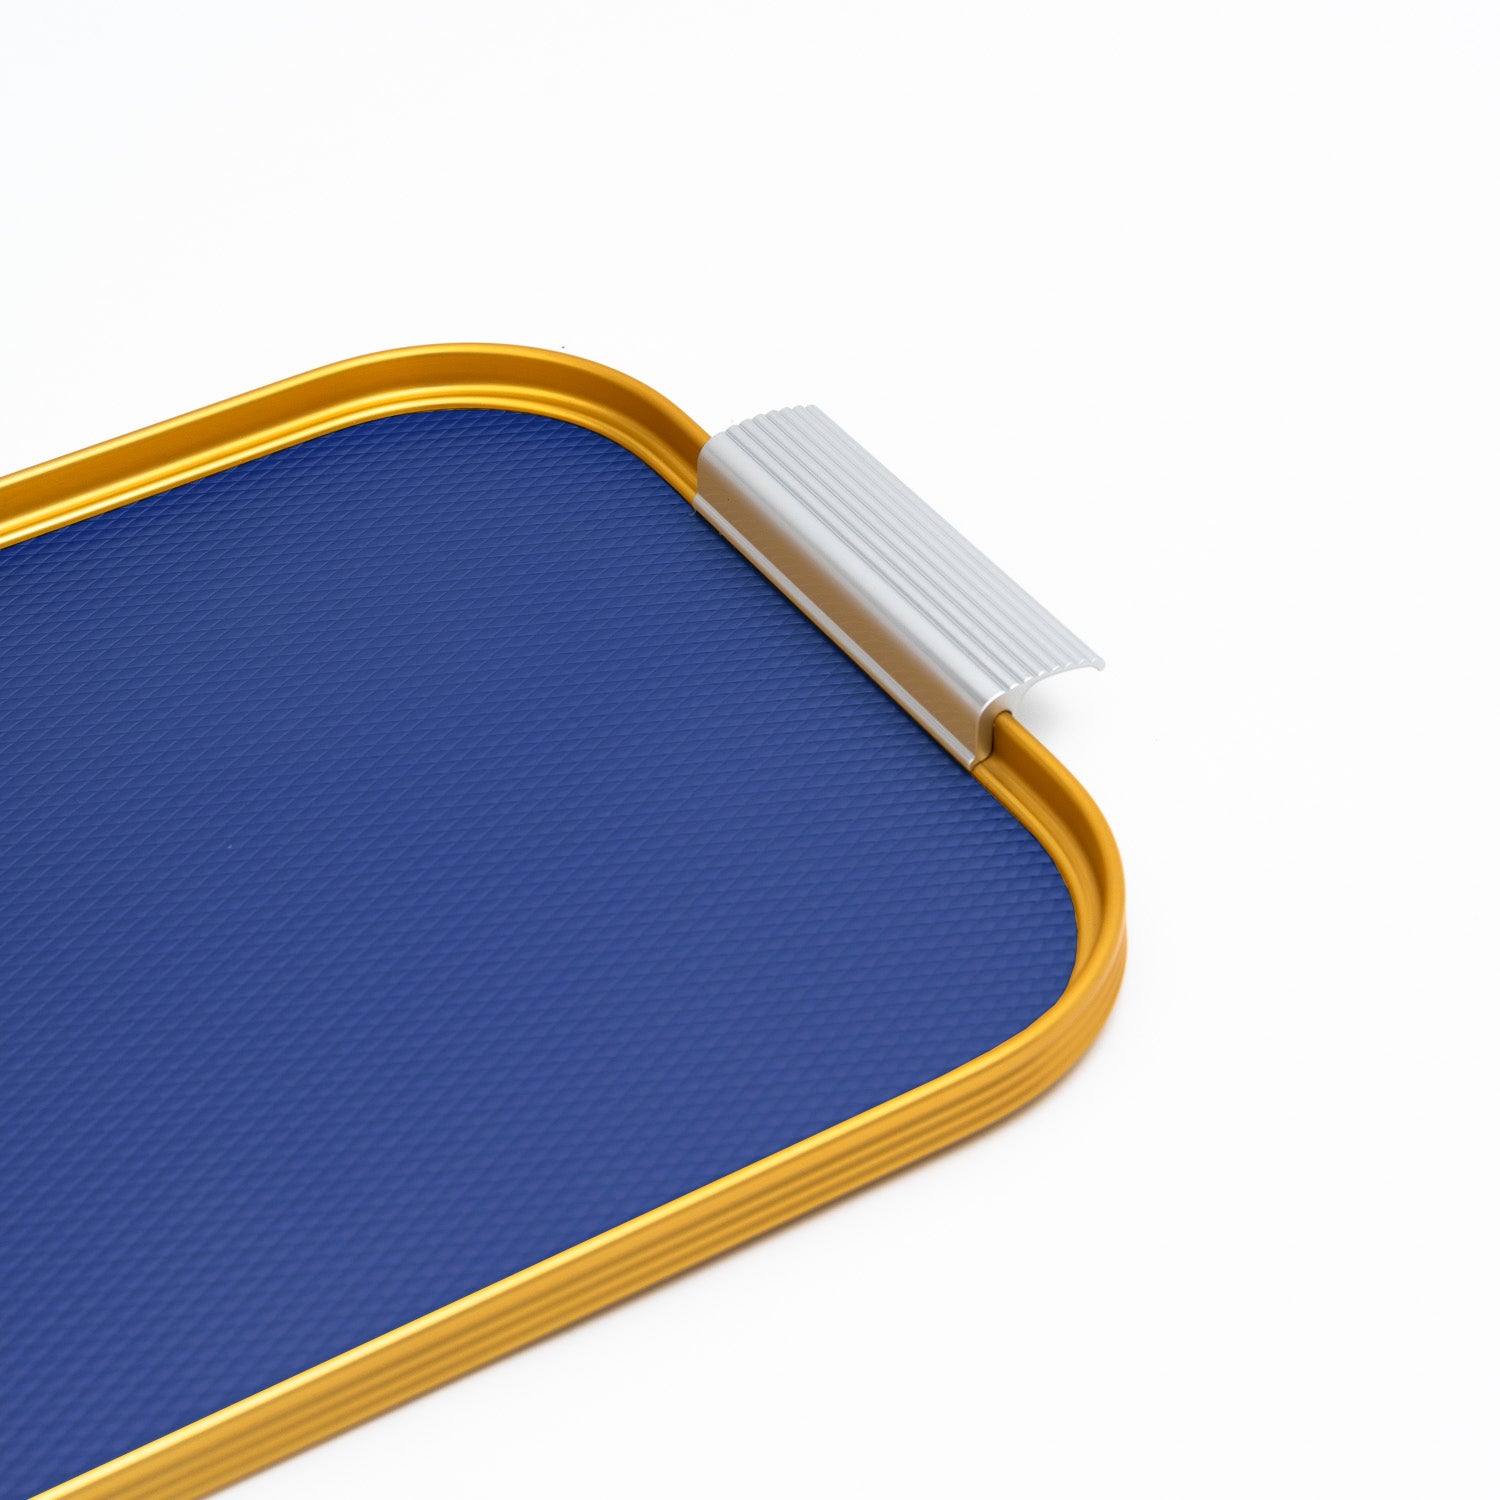 Kaymet metal ribbed tray size S14 in royal blue, gold and silver